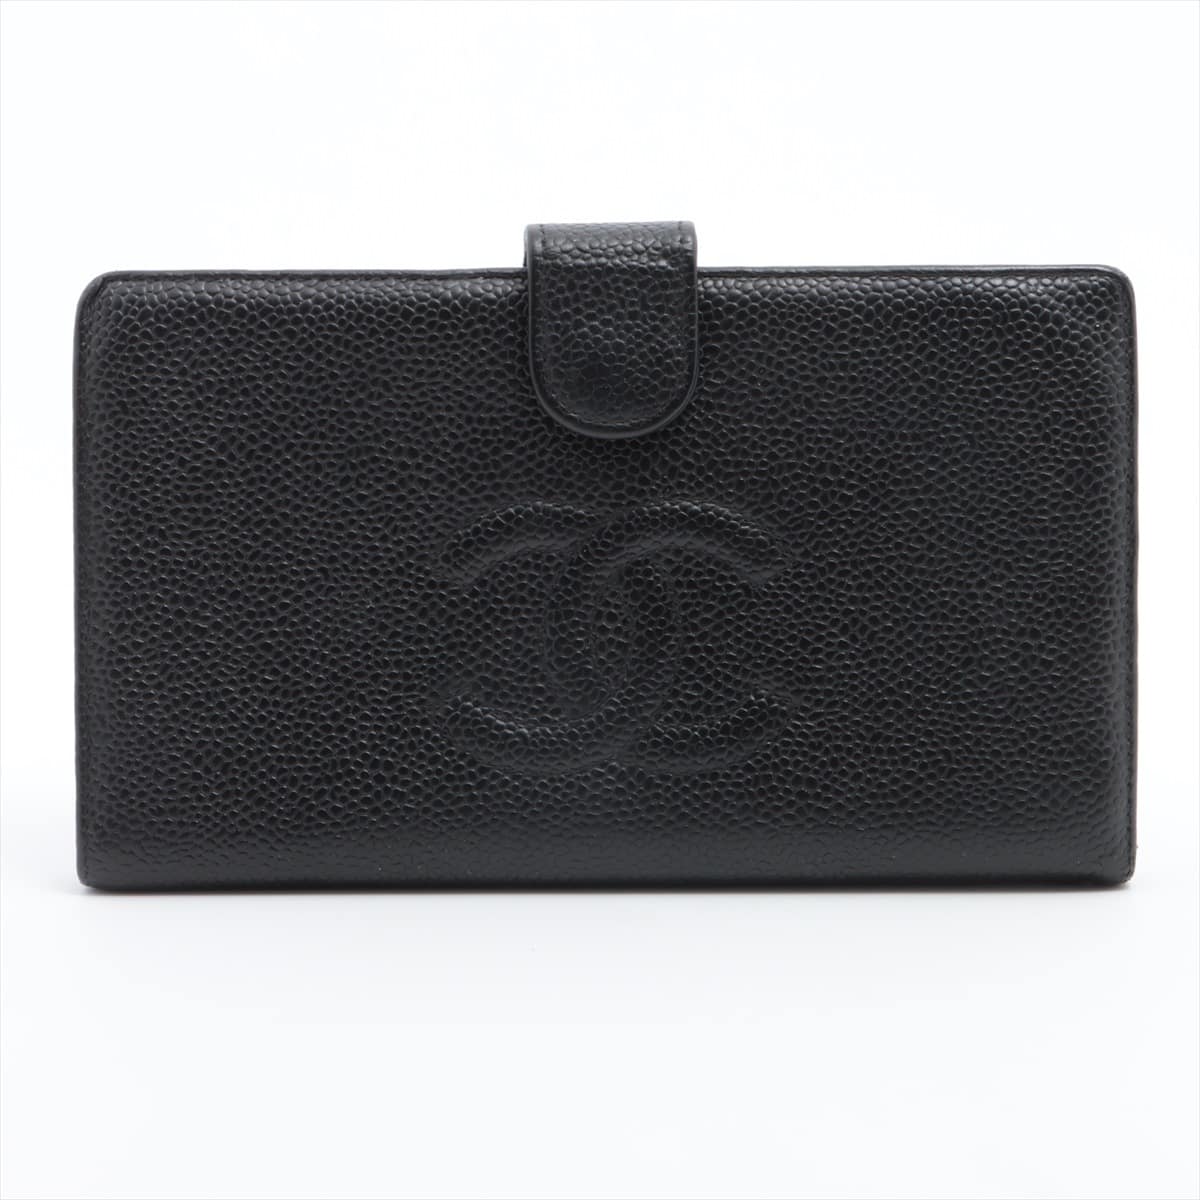 Chanel Coco Mark Caviarskin Wallet Black Gold Metal fittings No serial seal